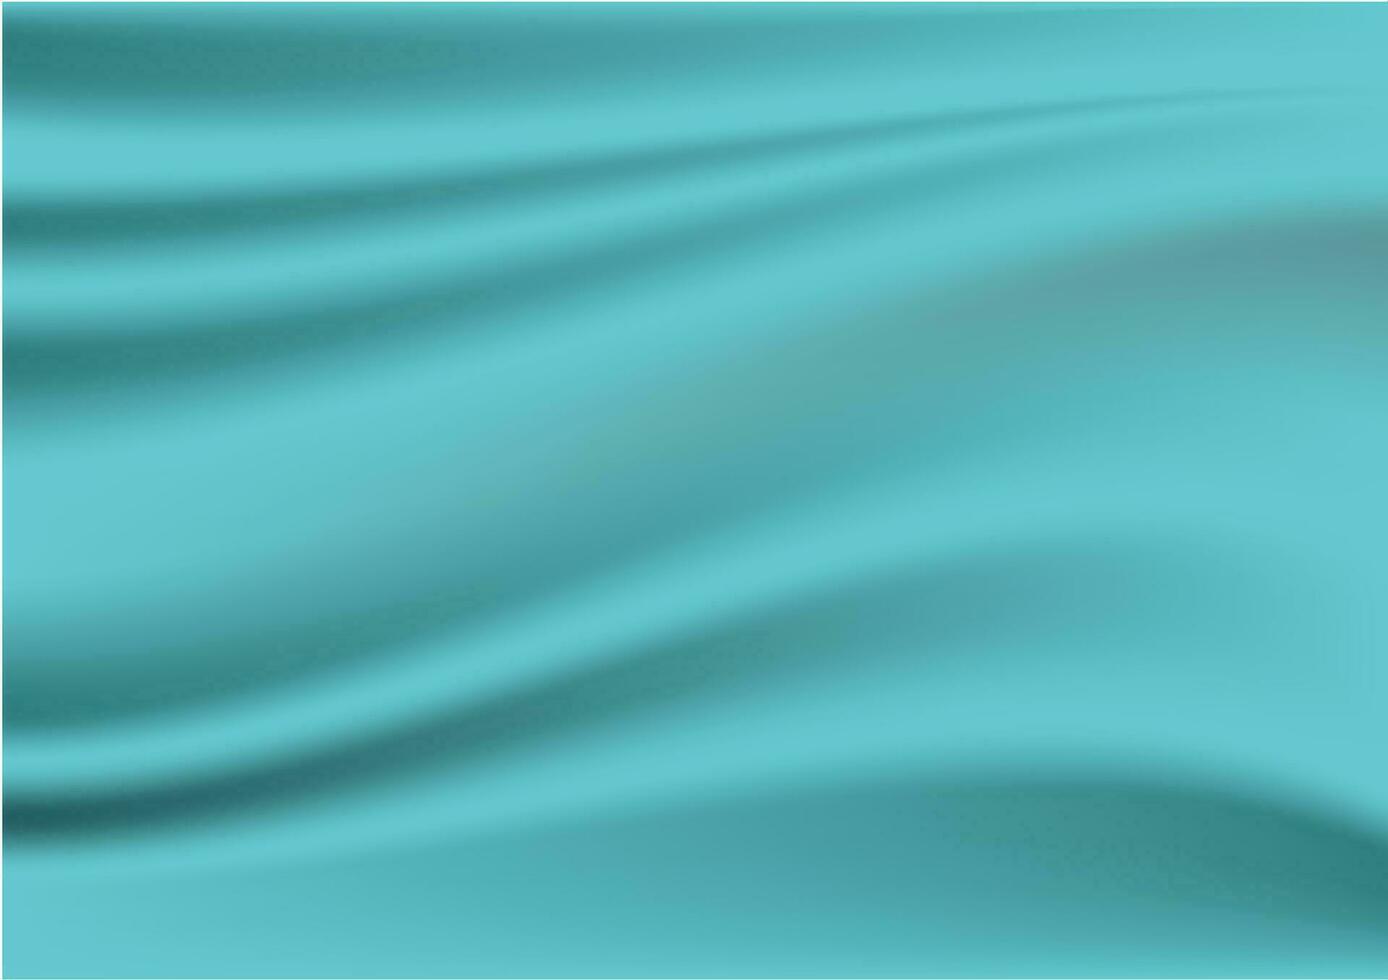 Abstract Blue fabric background vector